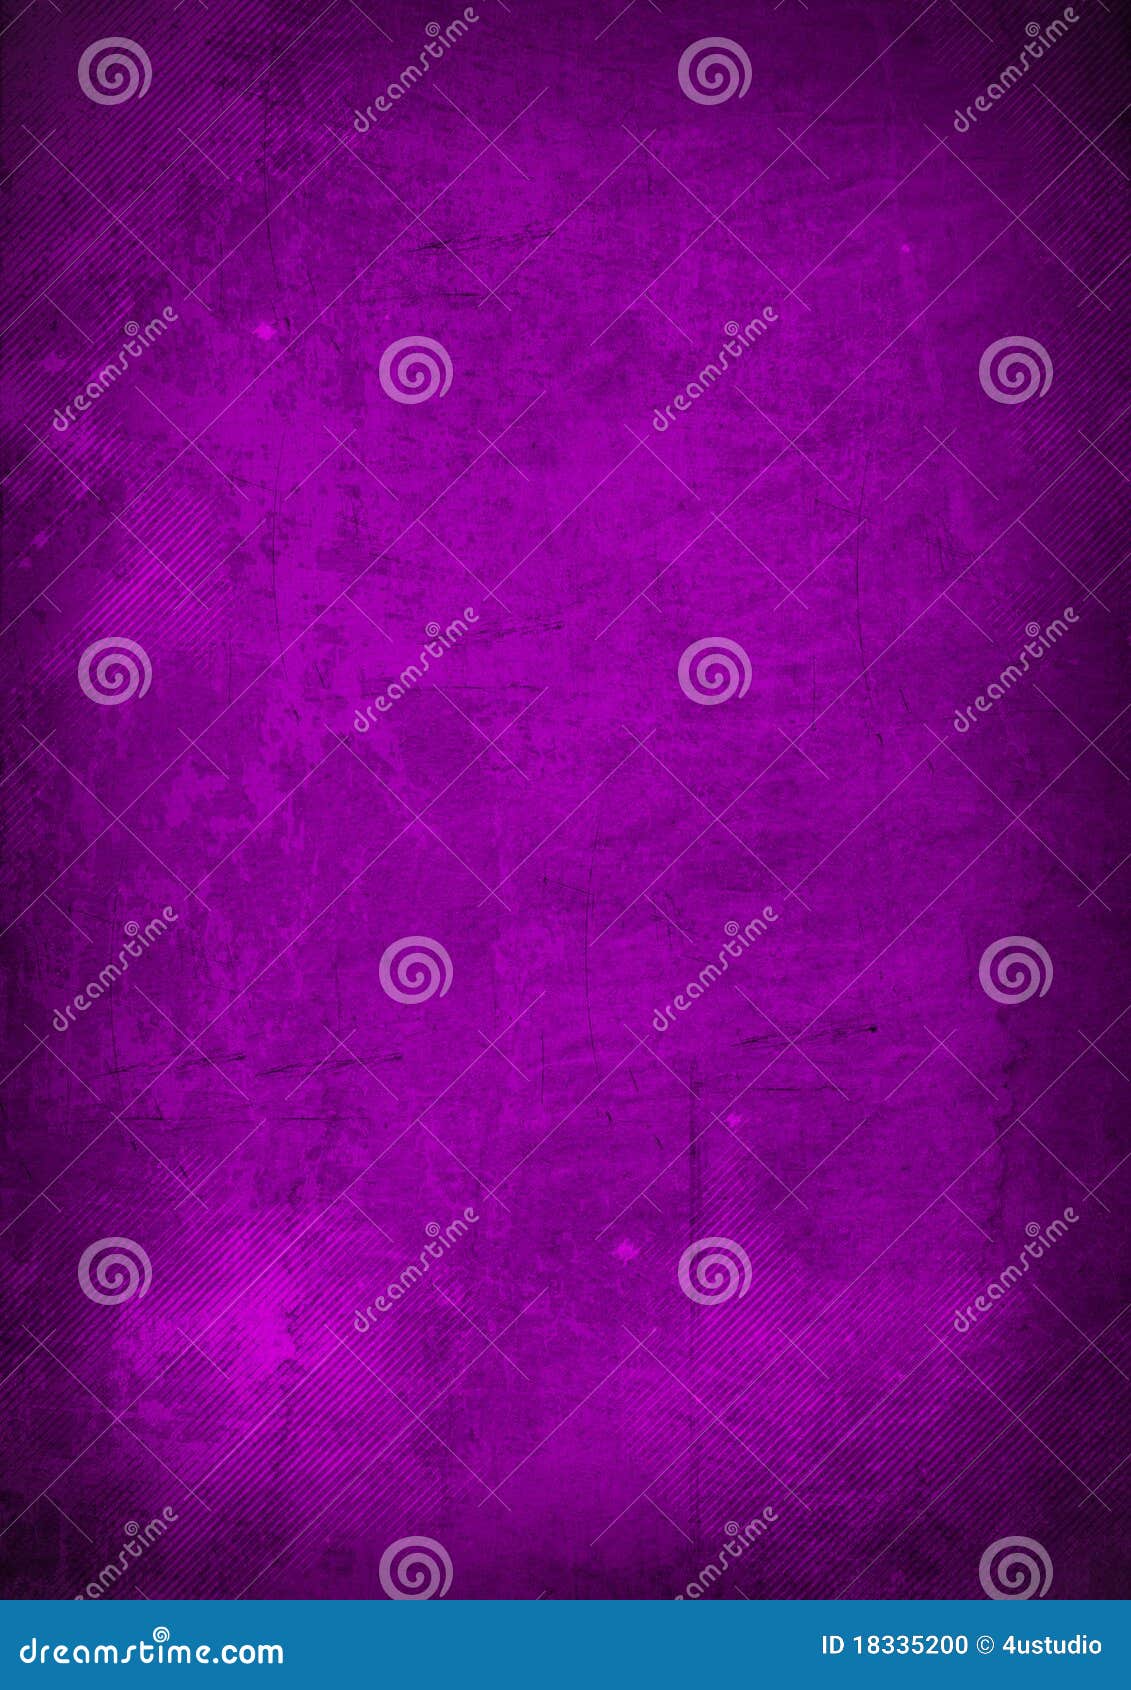 purple abstract grunge background